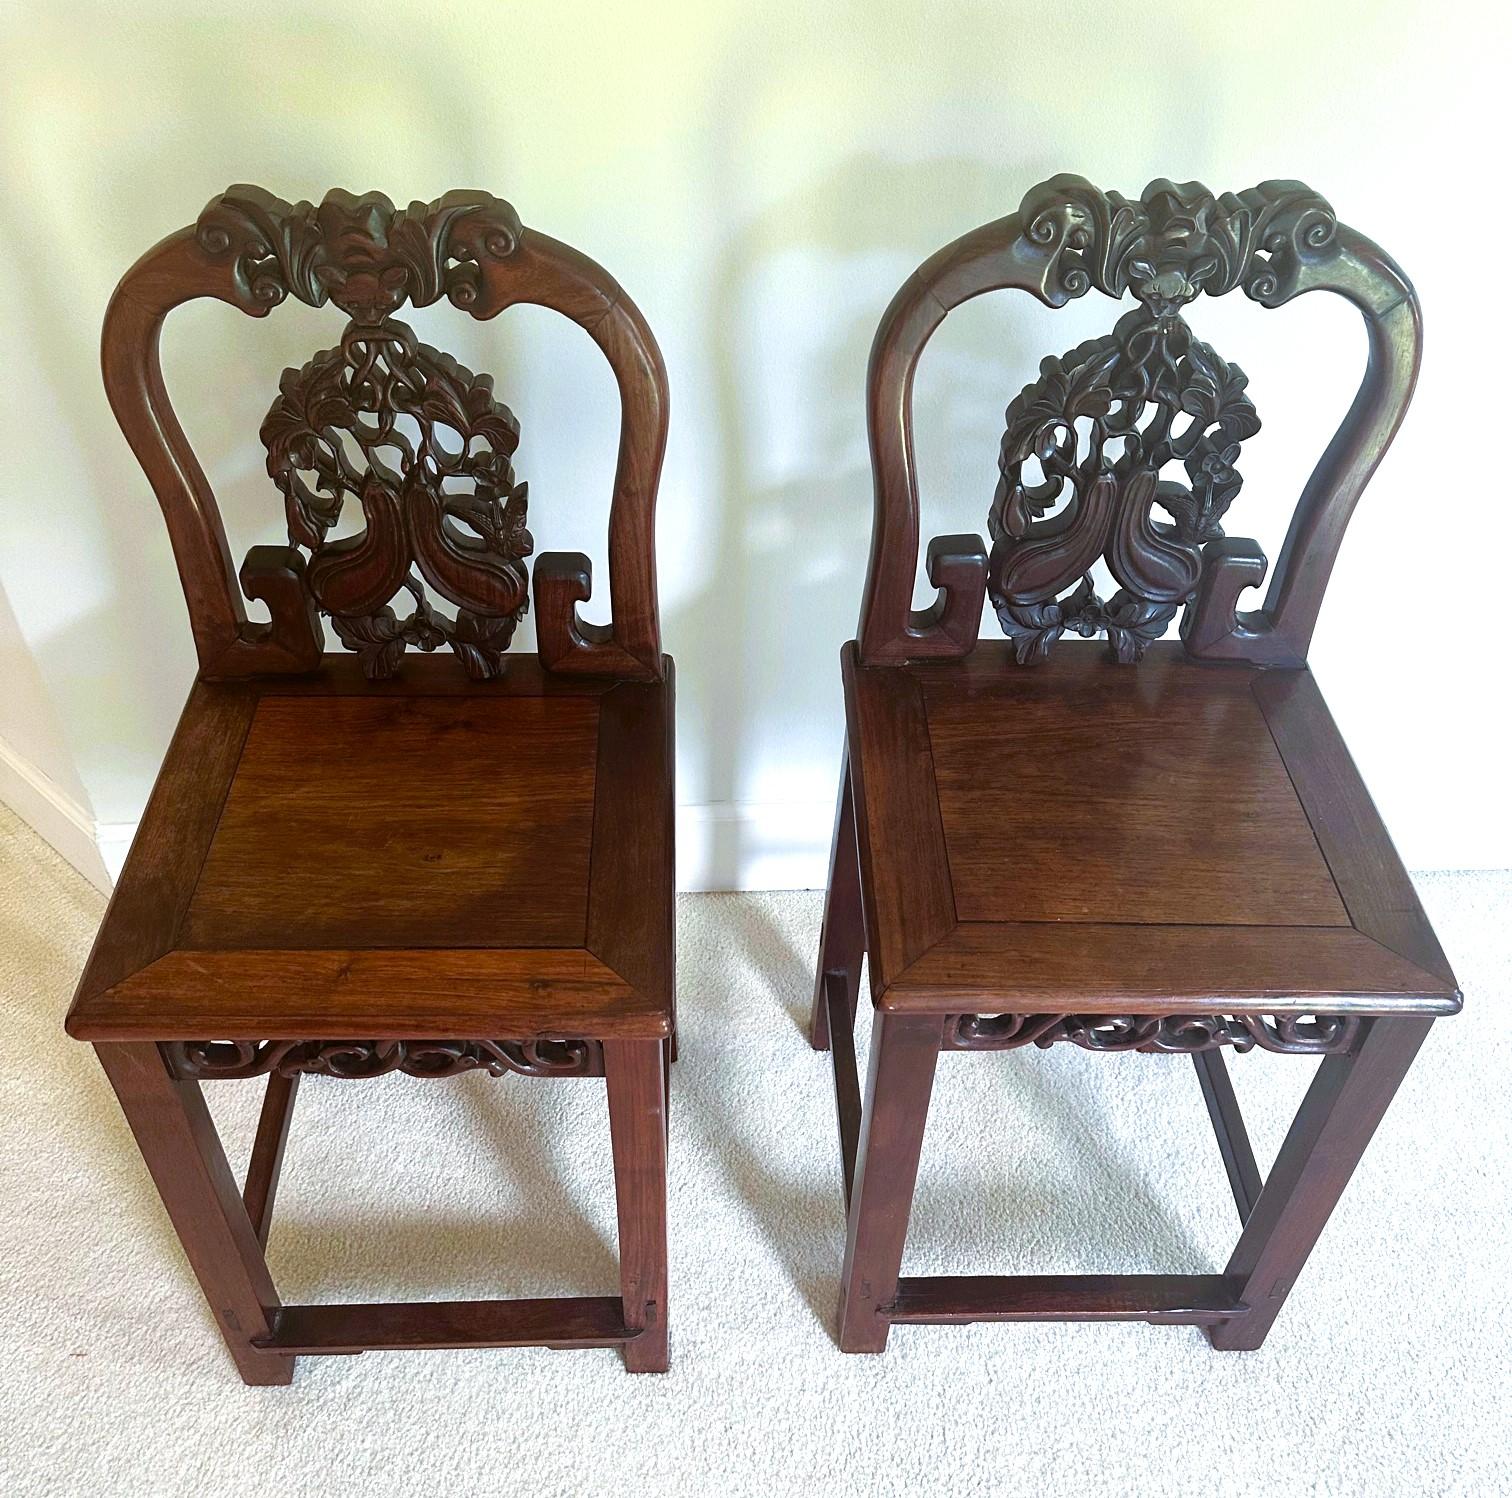 A pair of antique Chinese side chairs circa 19th century, late Qing Dynasty. Made from highly grained Hong Mu, a hard wood that resembles the Chinese rosewood, Huanghuali. These chairs feature a craved back support with longevity symbols such as